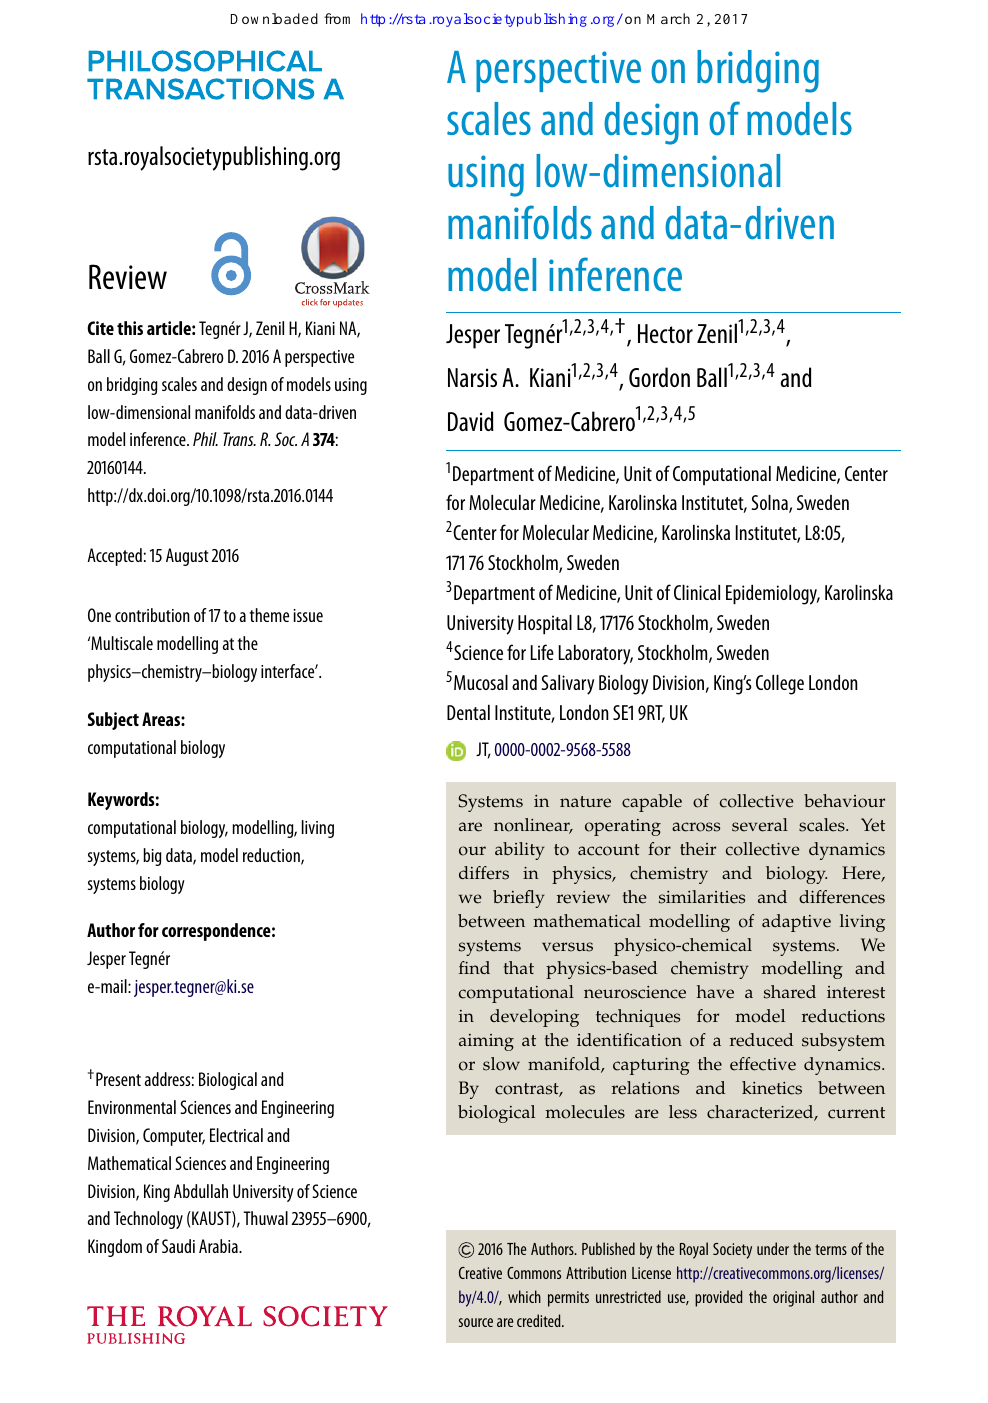 A perspective on bridging scales design of models using low-dimensional manifolds and data-driven model inference – of research paper in Nano-technology. Download scholarly article PDF read for free on